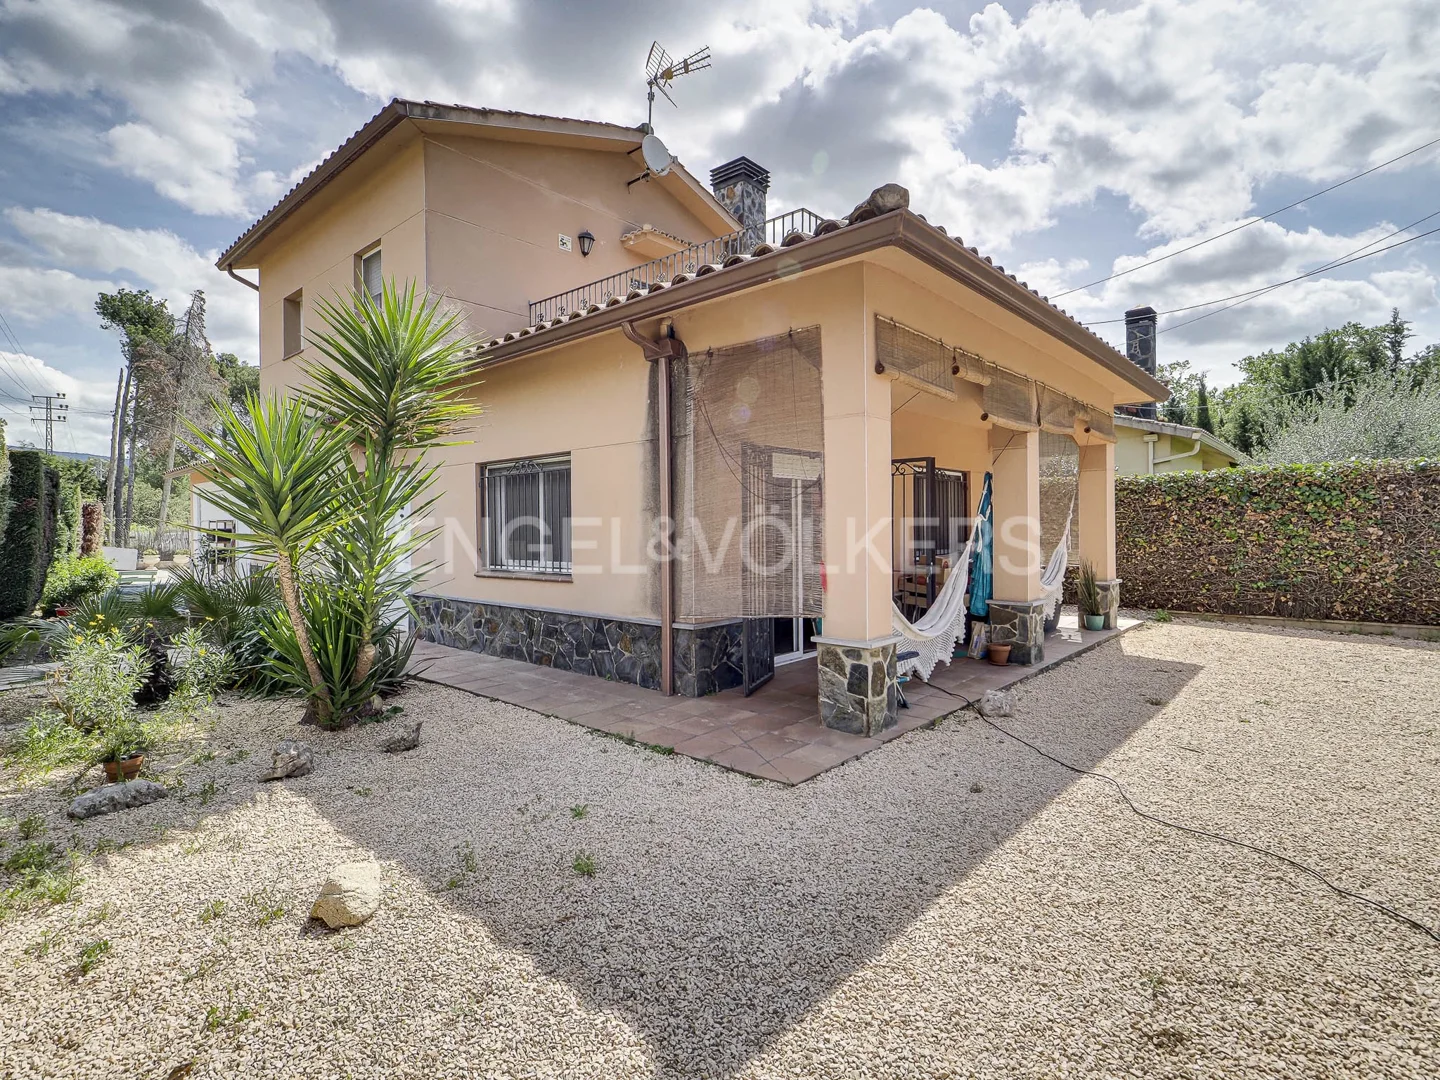 Beautiful and Cozy house in L'Ametlla del Valles.